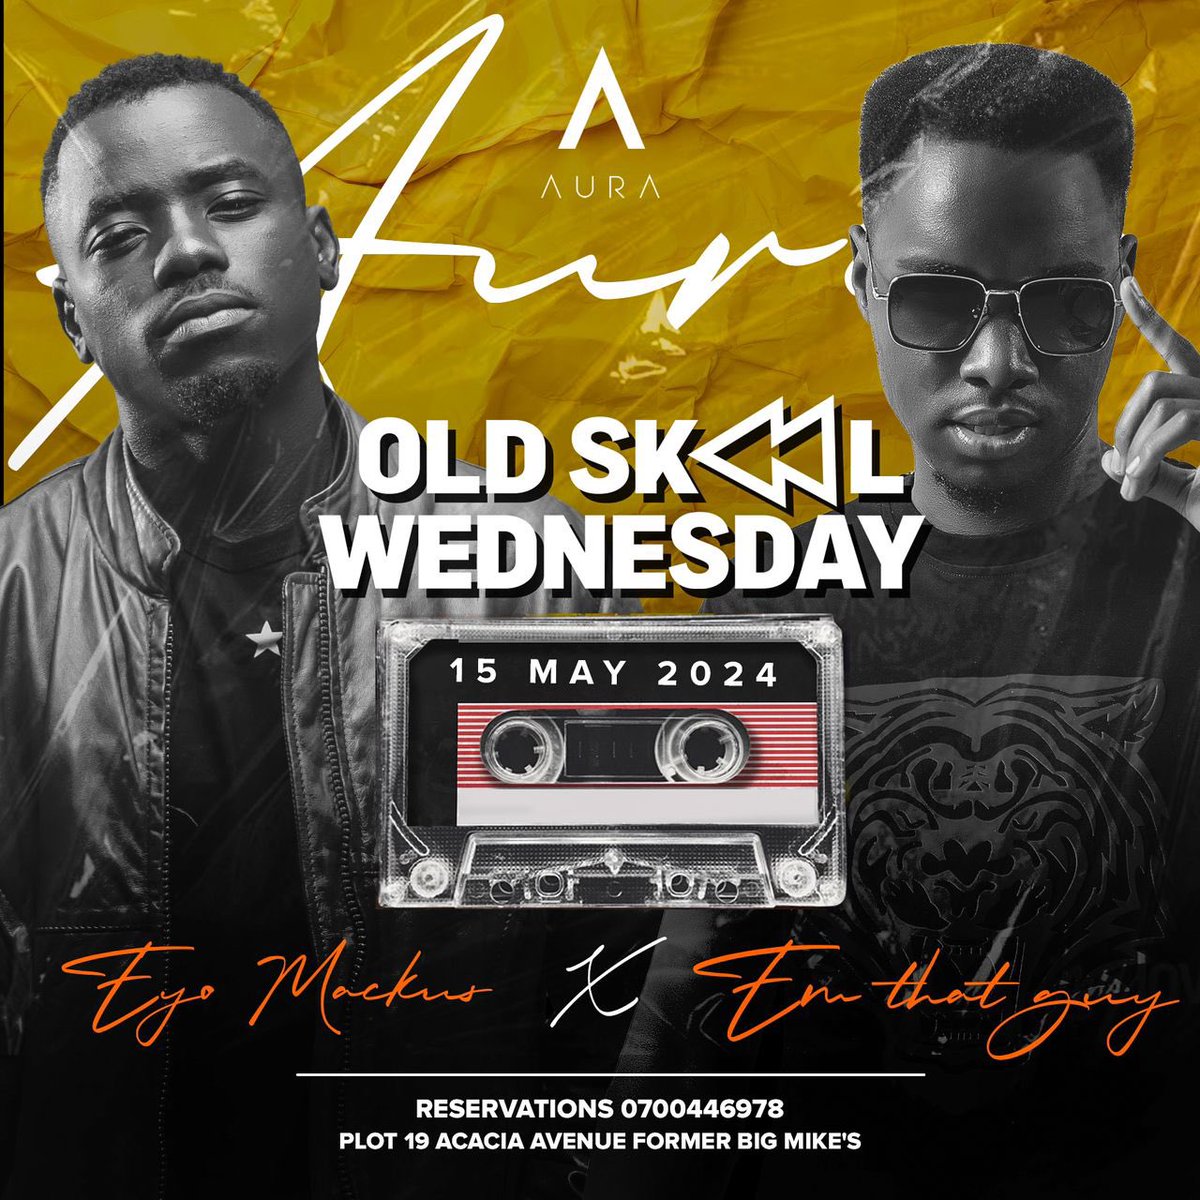 Step back in time with me & @EmThatGuy tonight as we take you on a journey through the classics! Join us behind the decks at Aura for a night of old school jams, funky beats, and good vibes. Let's rewind the clock and dance the night away! See you on the dance floor! #EyoMackus